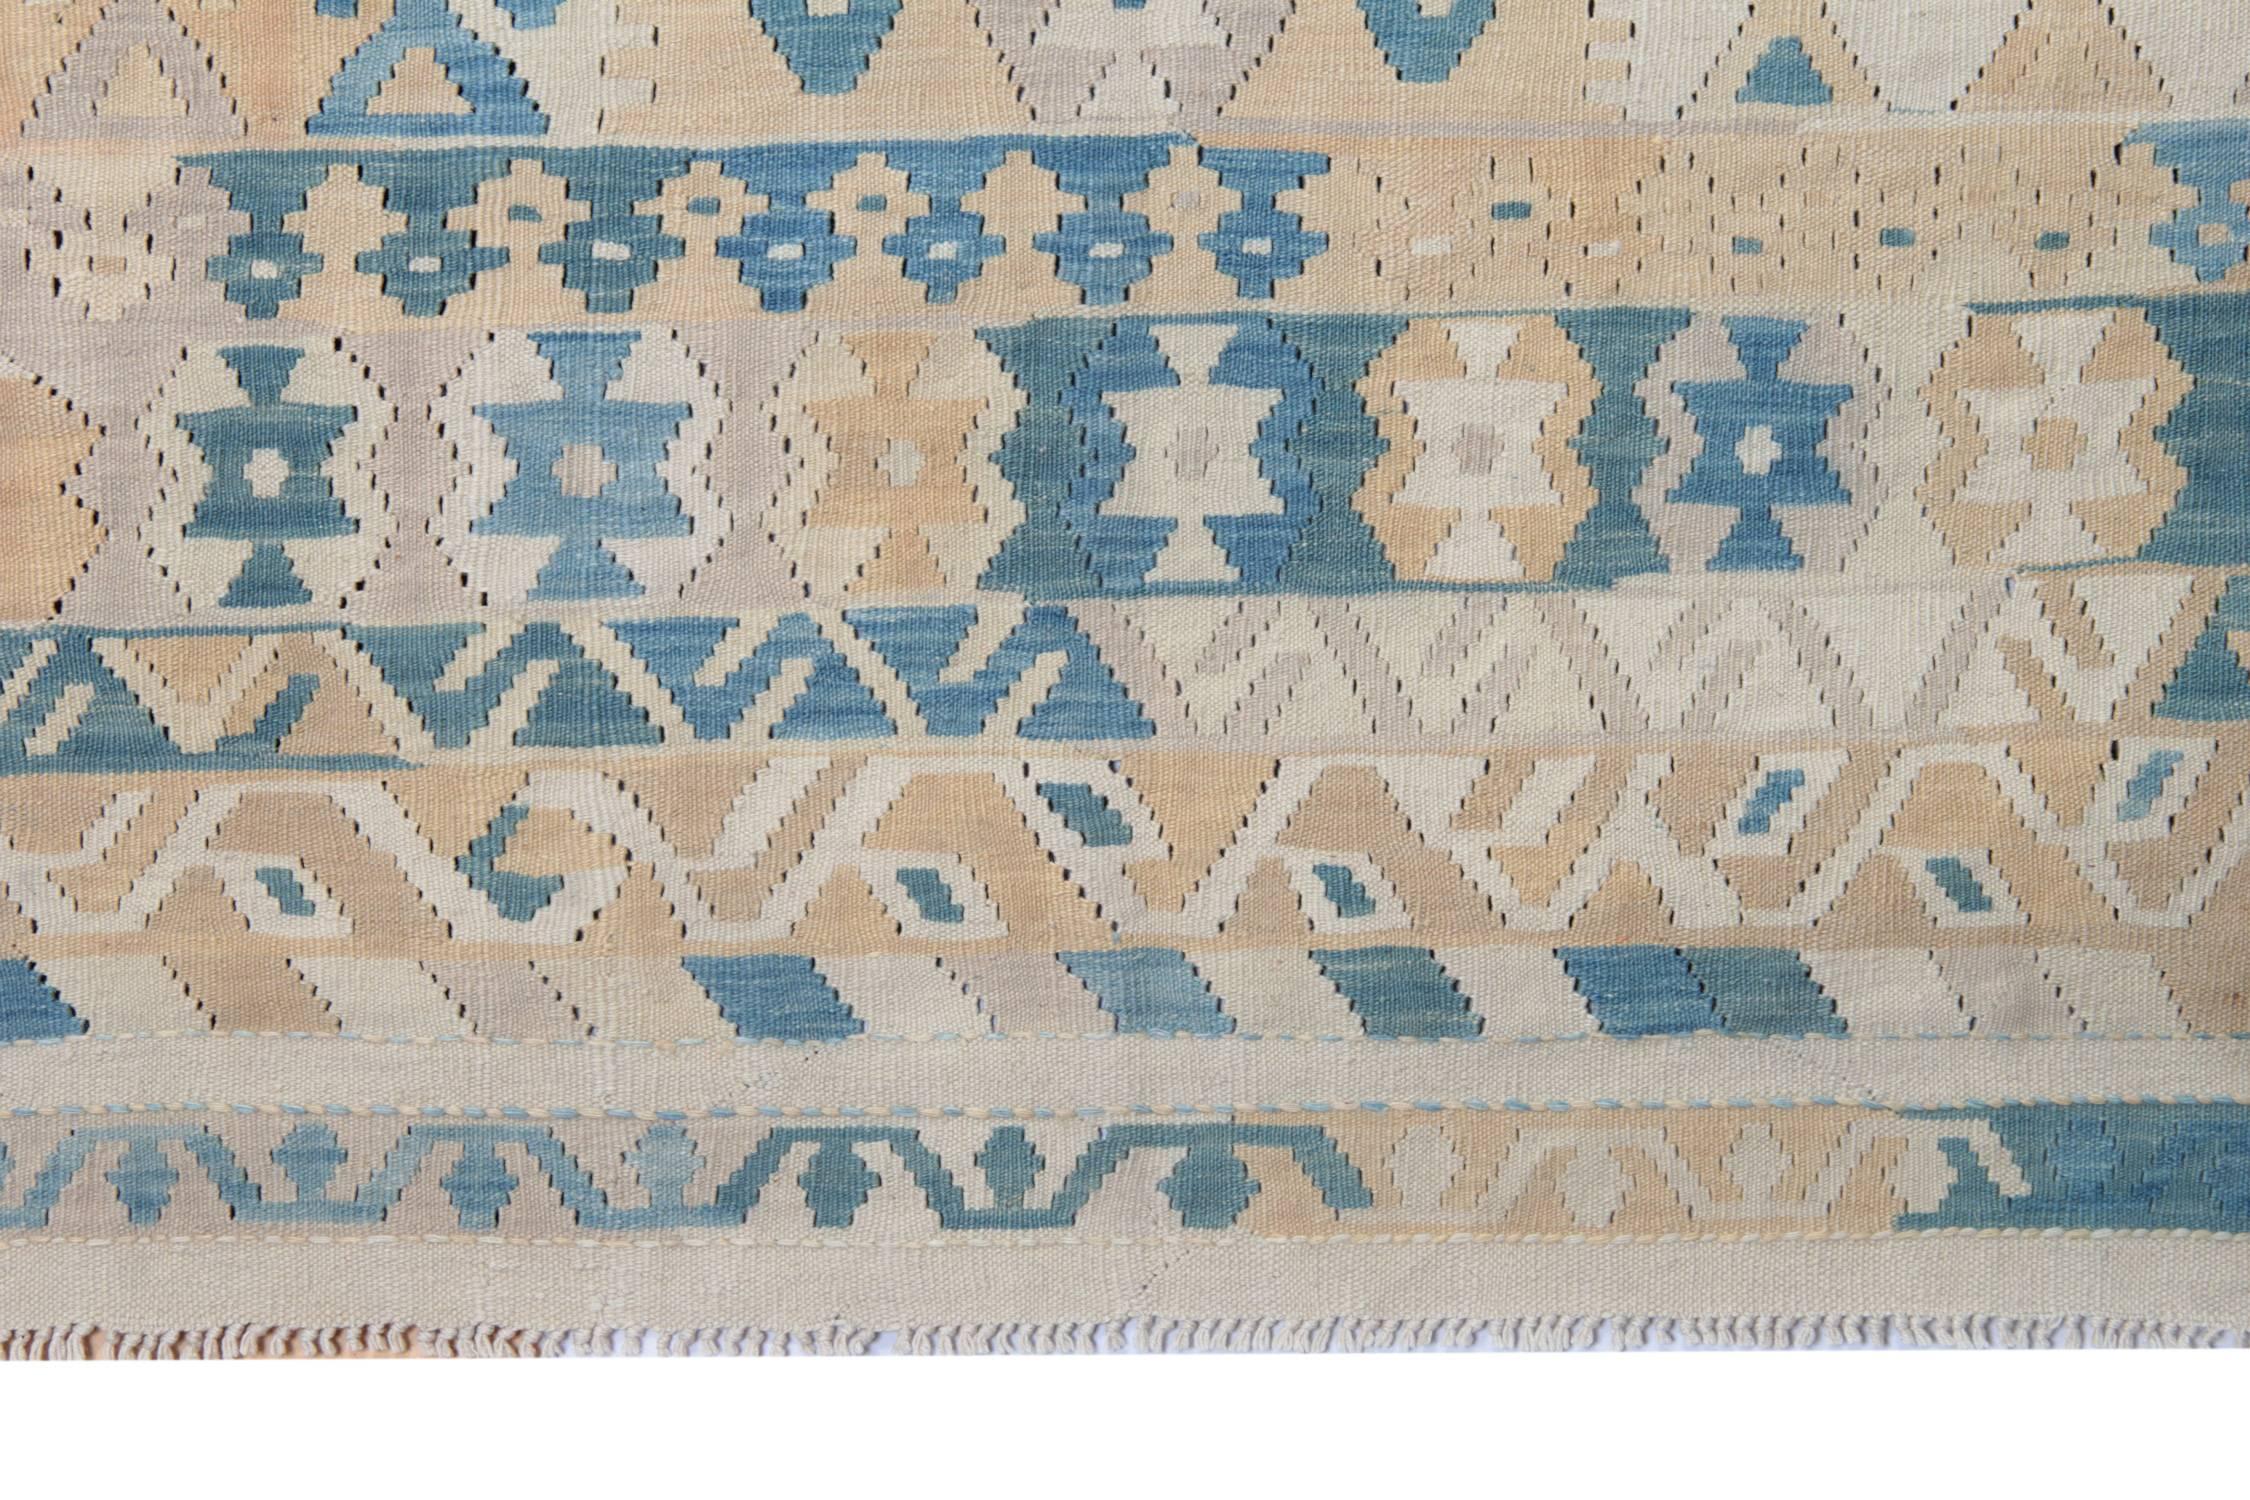 Vegetable Dyed New Kilim Rugs, Traditional Rugs, Afghan Rugs, Carpet from Afghanistan